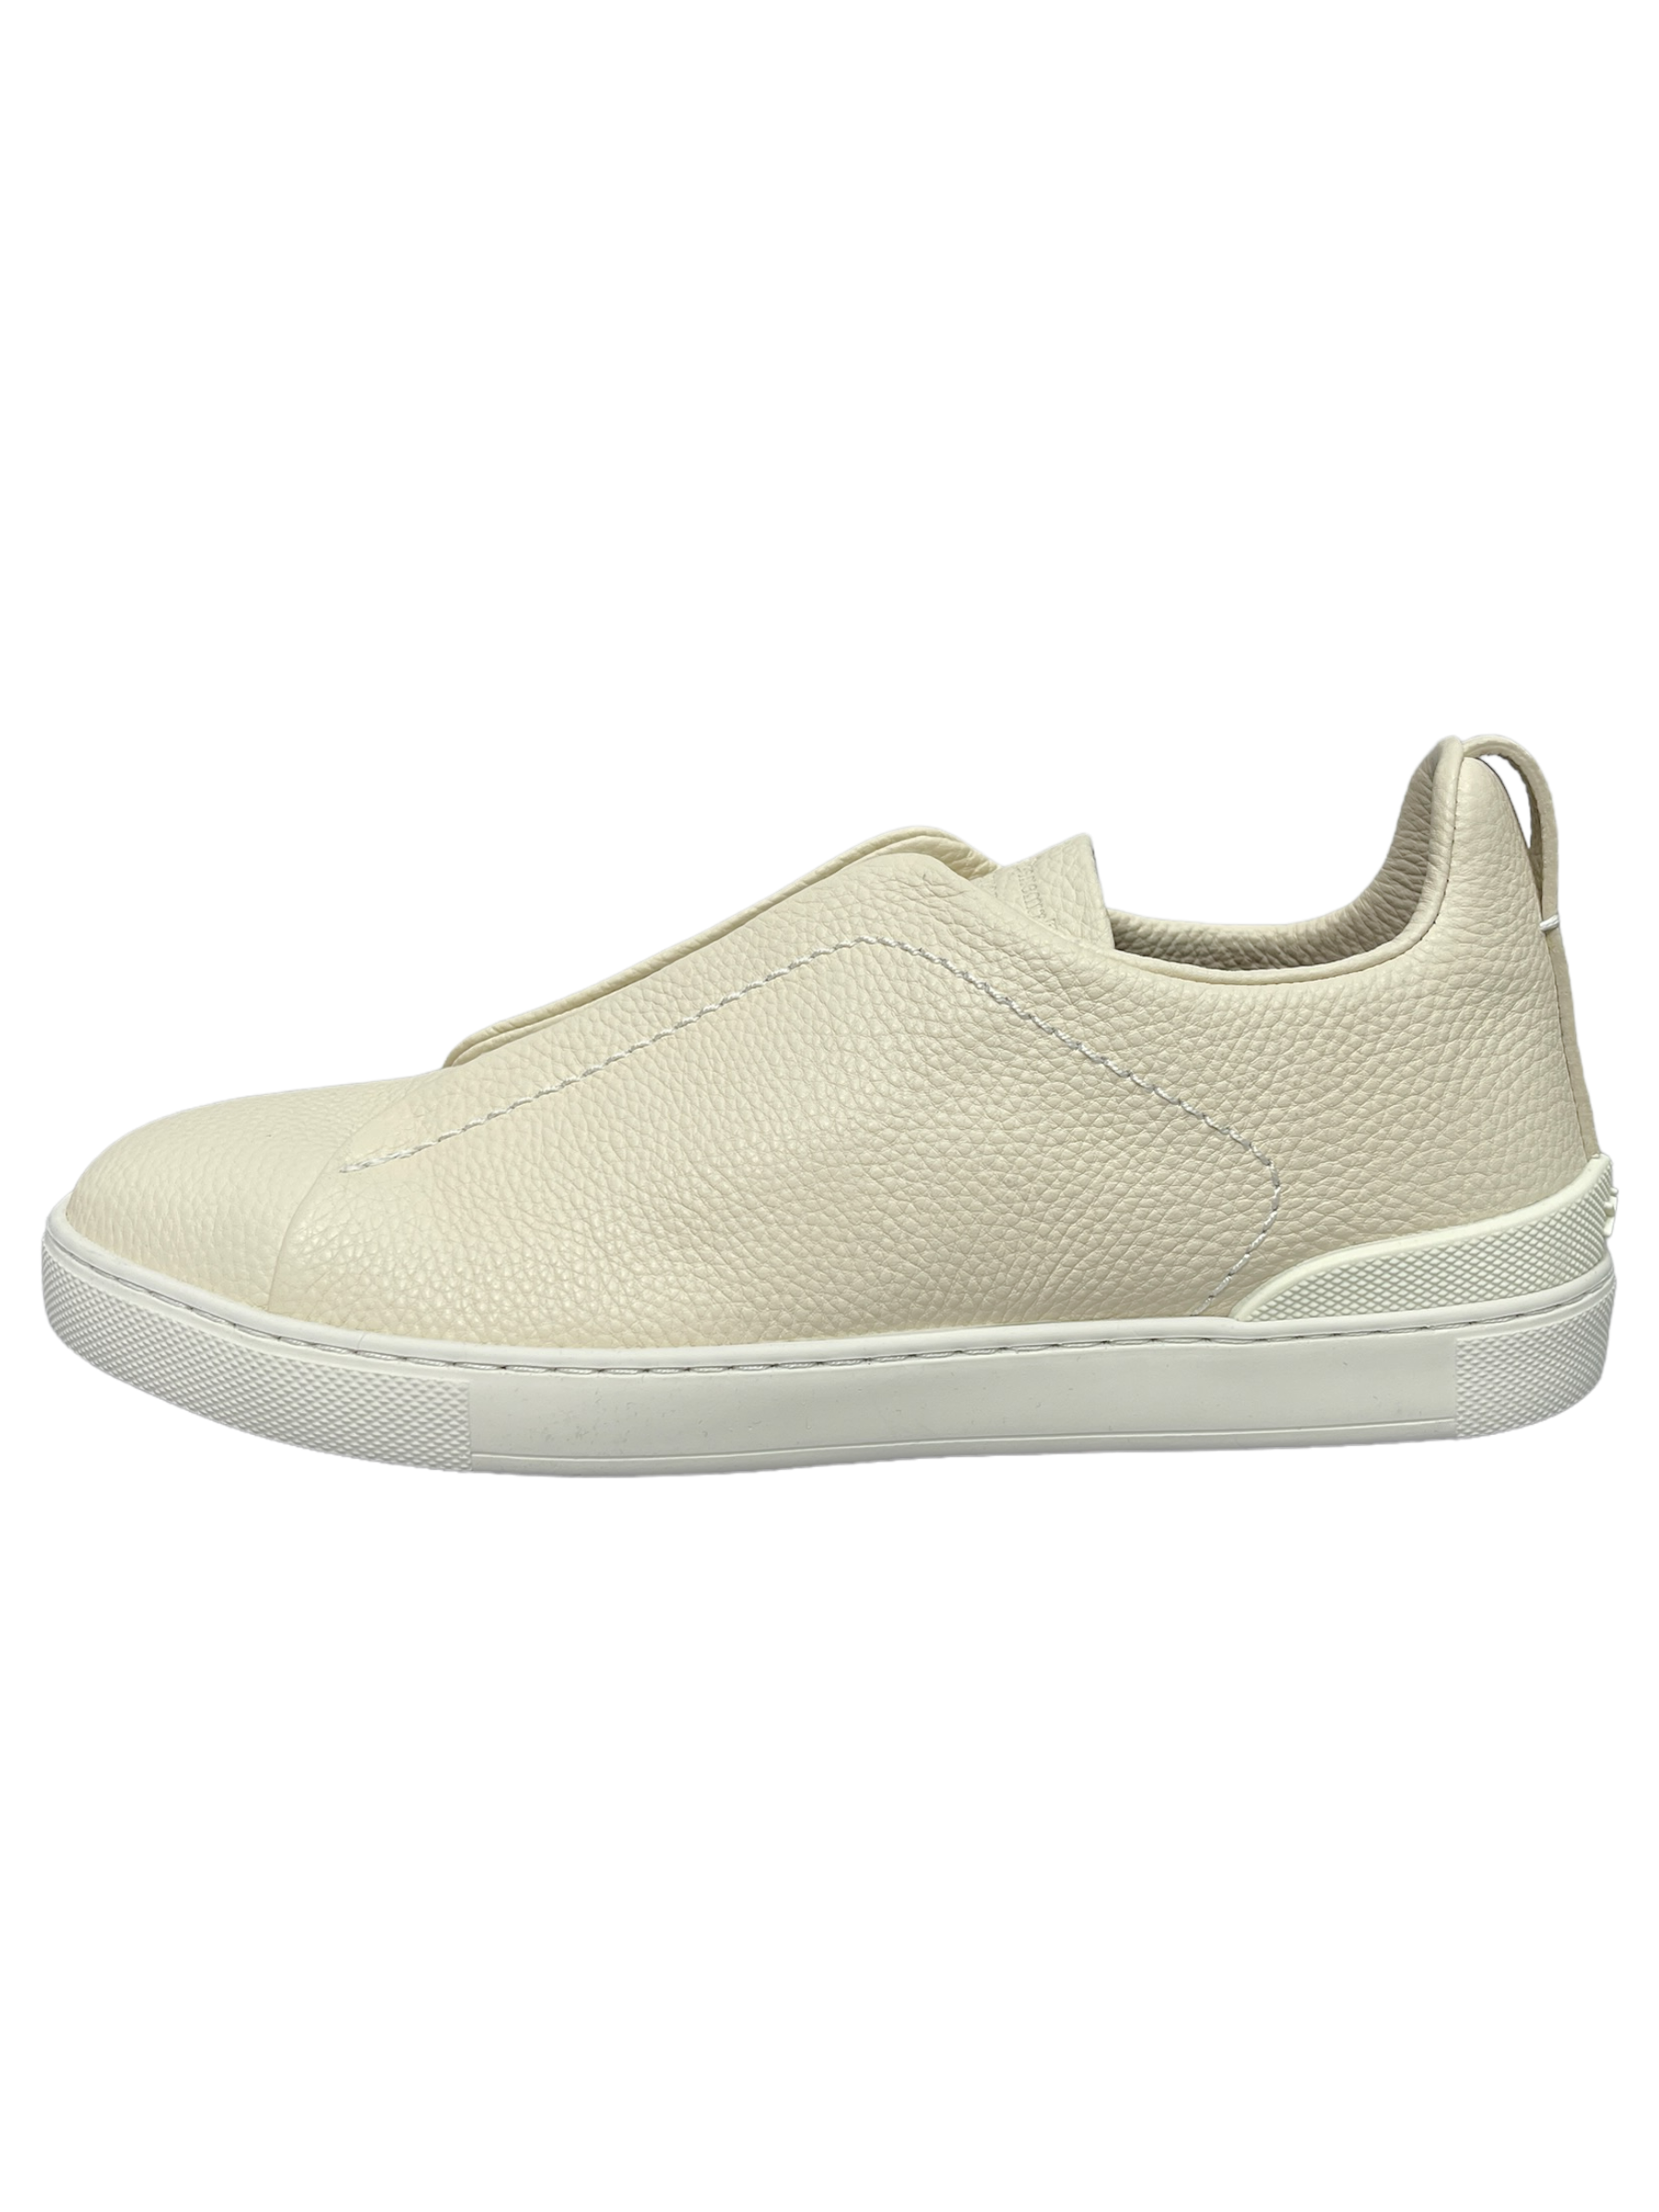 Ermenegildo Zegna XXX Couture Cream Leather Laceless Sneaker - Genuine Design luxury consignment Calgary, Canada New and pre-owned clothing, shoes, accessories.